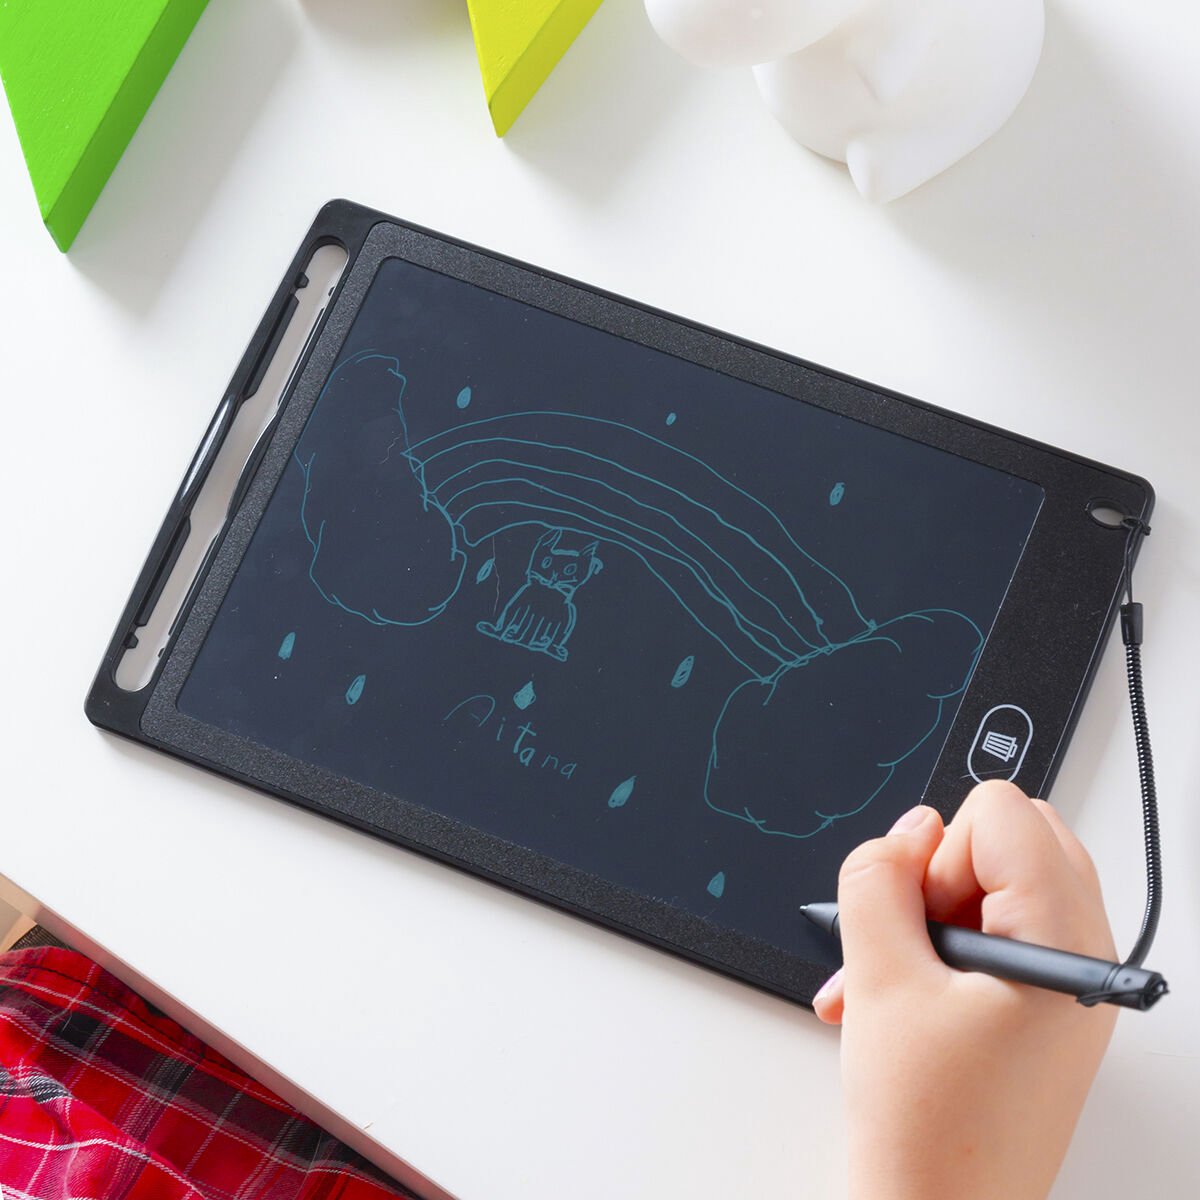 Innovagoods Lcd Magic Drablet Tablet For Drawing And Writing